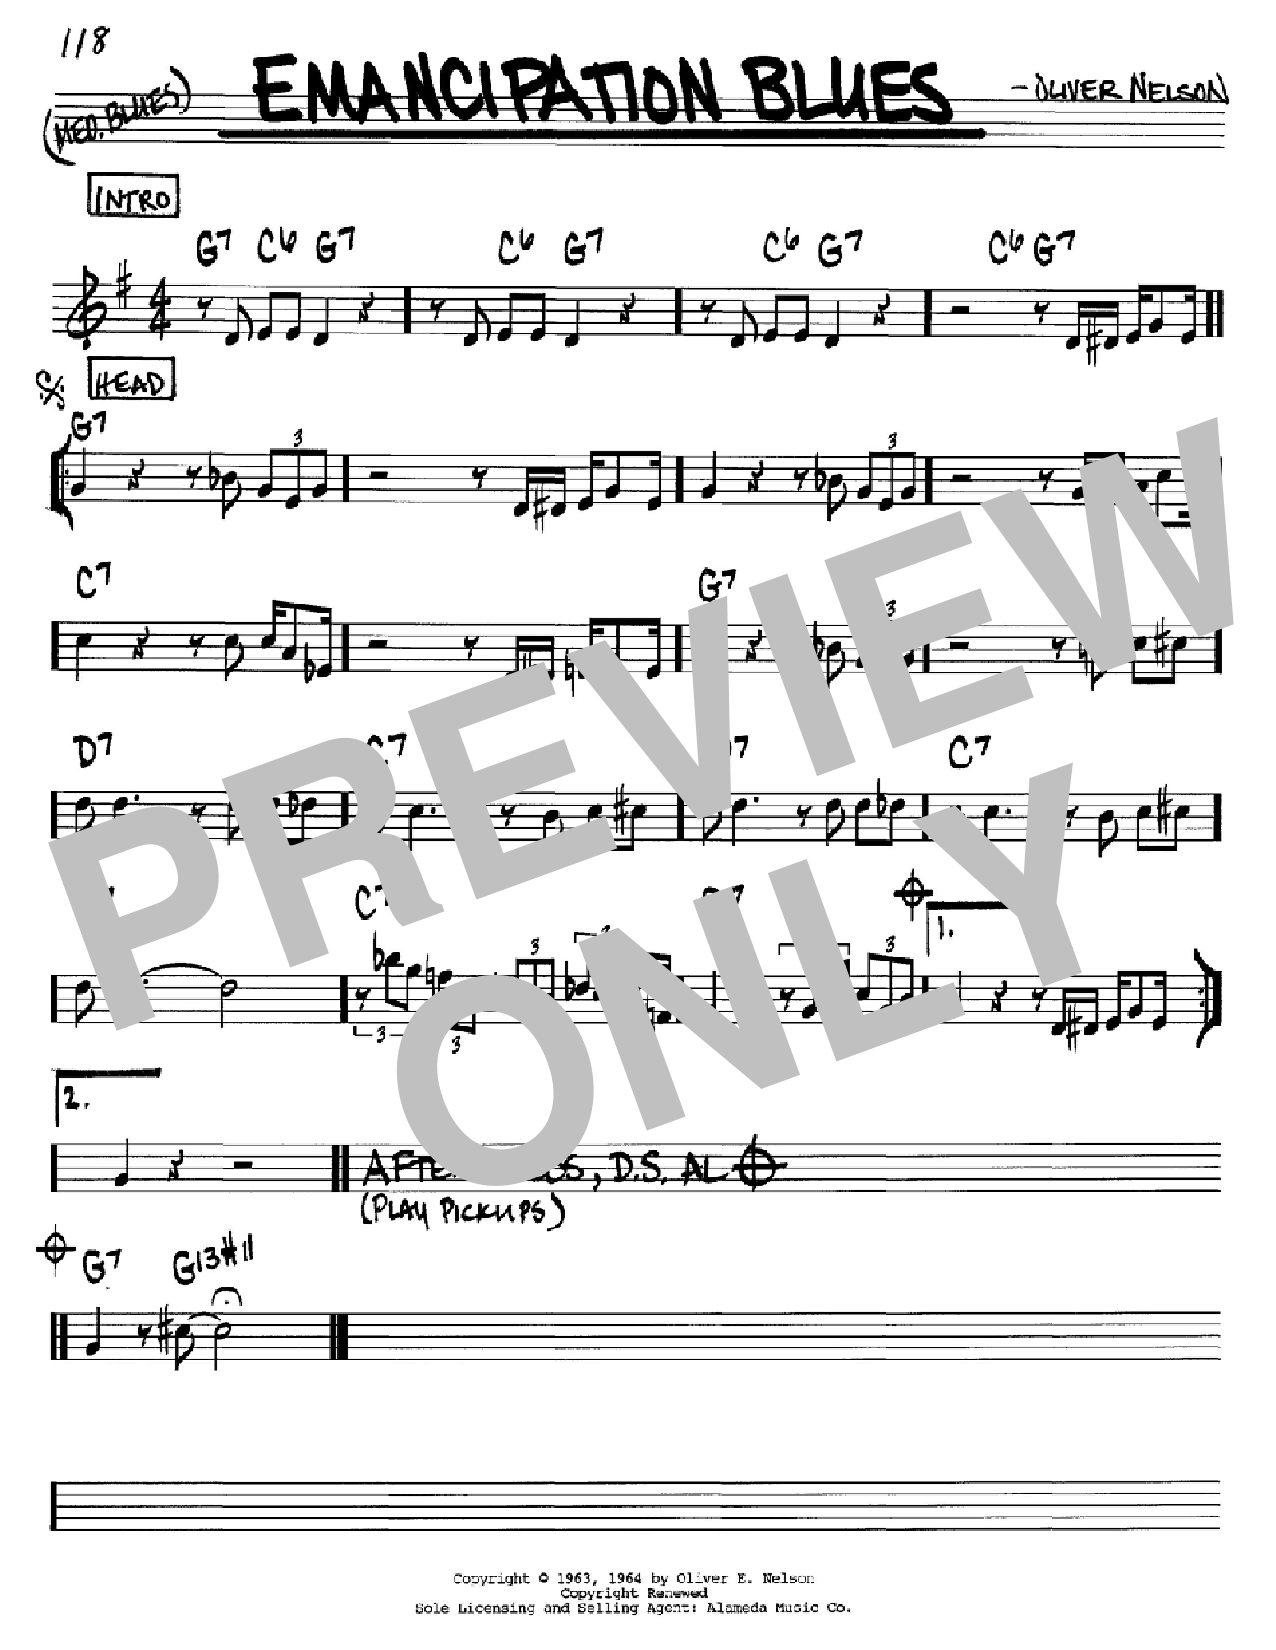 Download Oliver Nelson Emancipation Blues Sheet Music